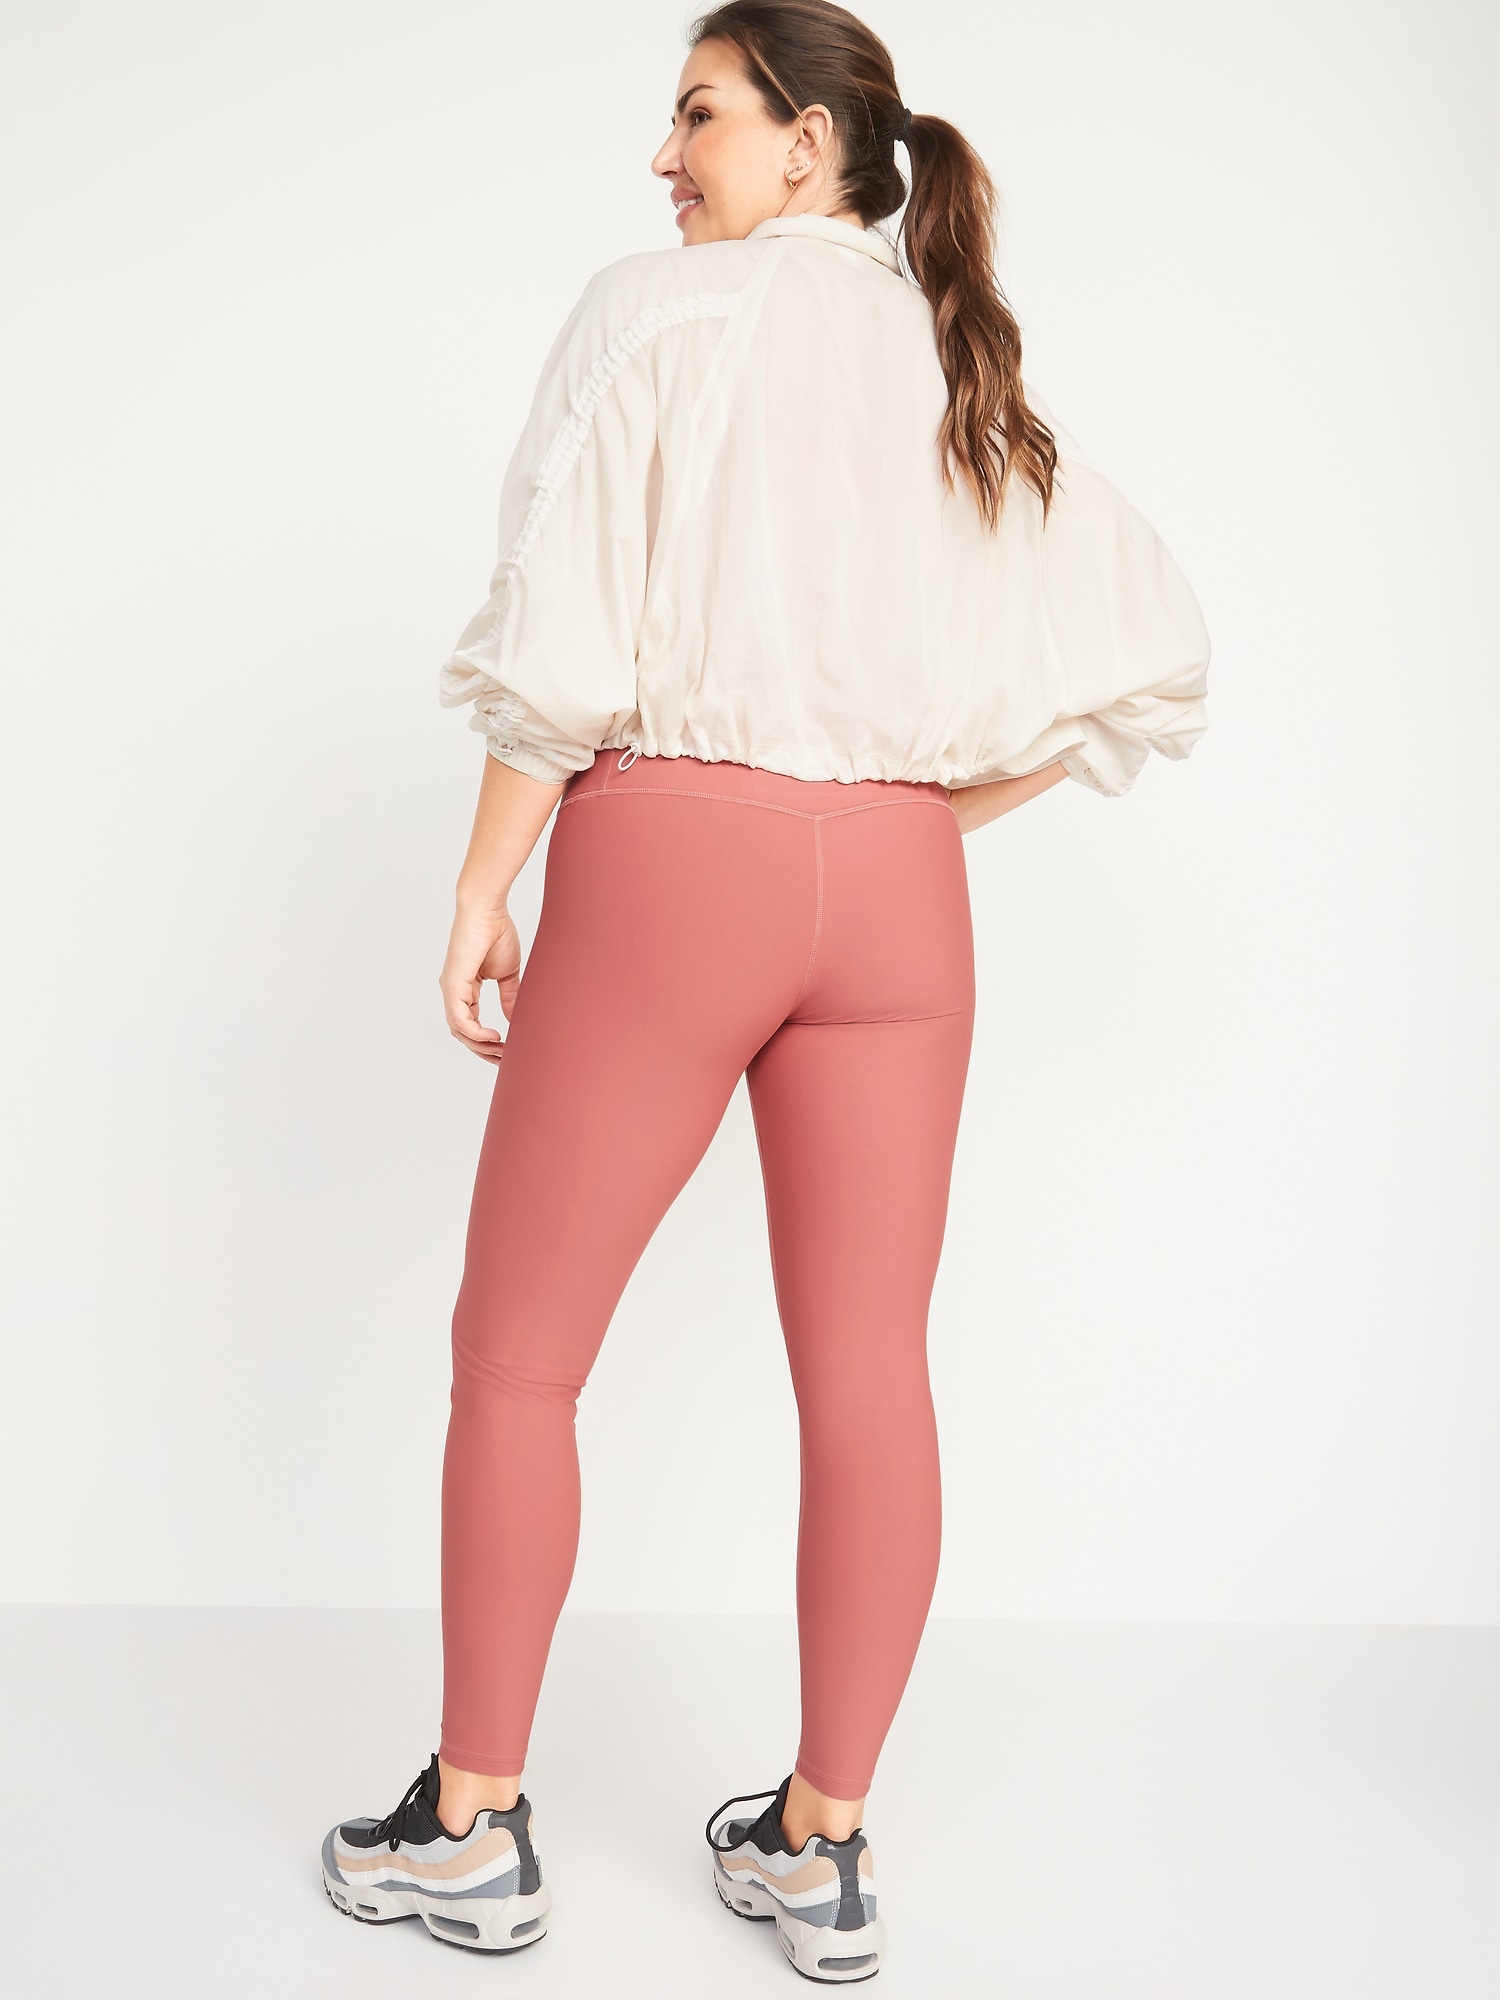 Old Navy leggings with 4,000 reviews are on sale for just $15, today only